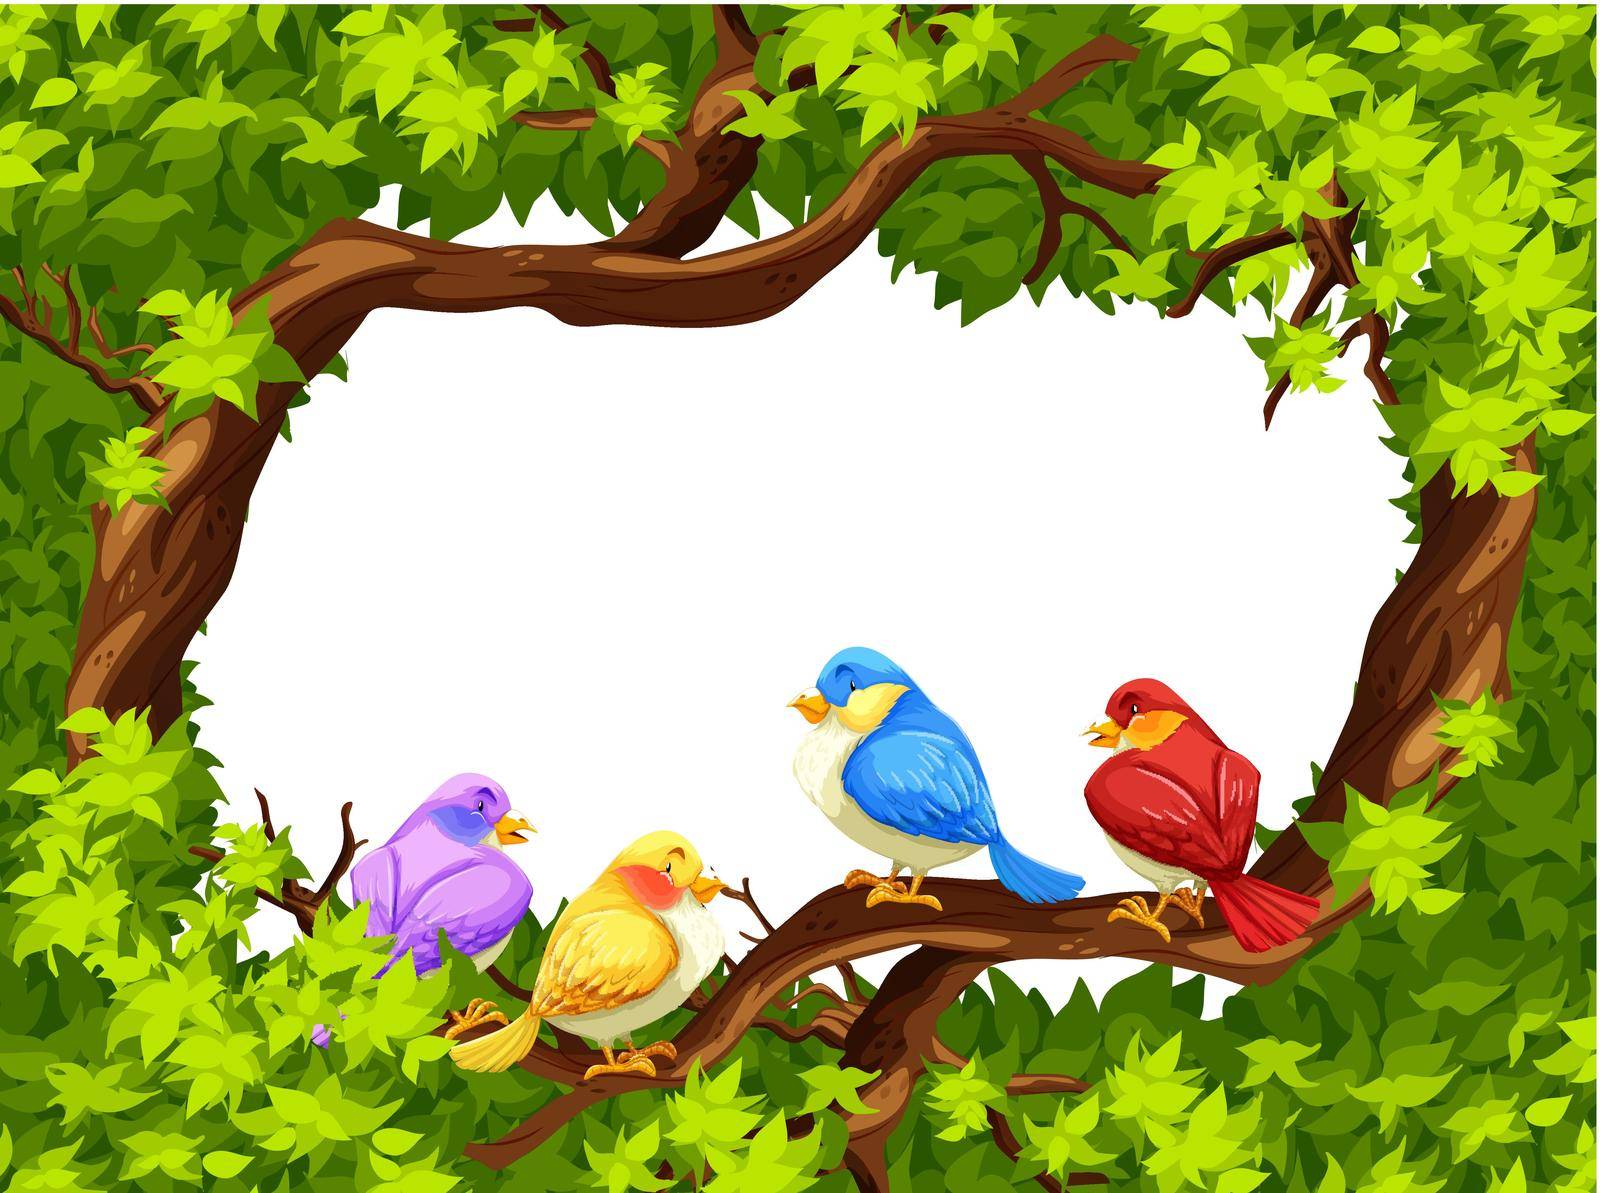 Four birds sitting on a branch of a tree